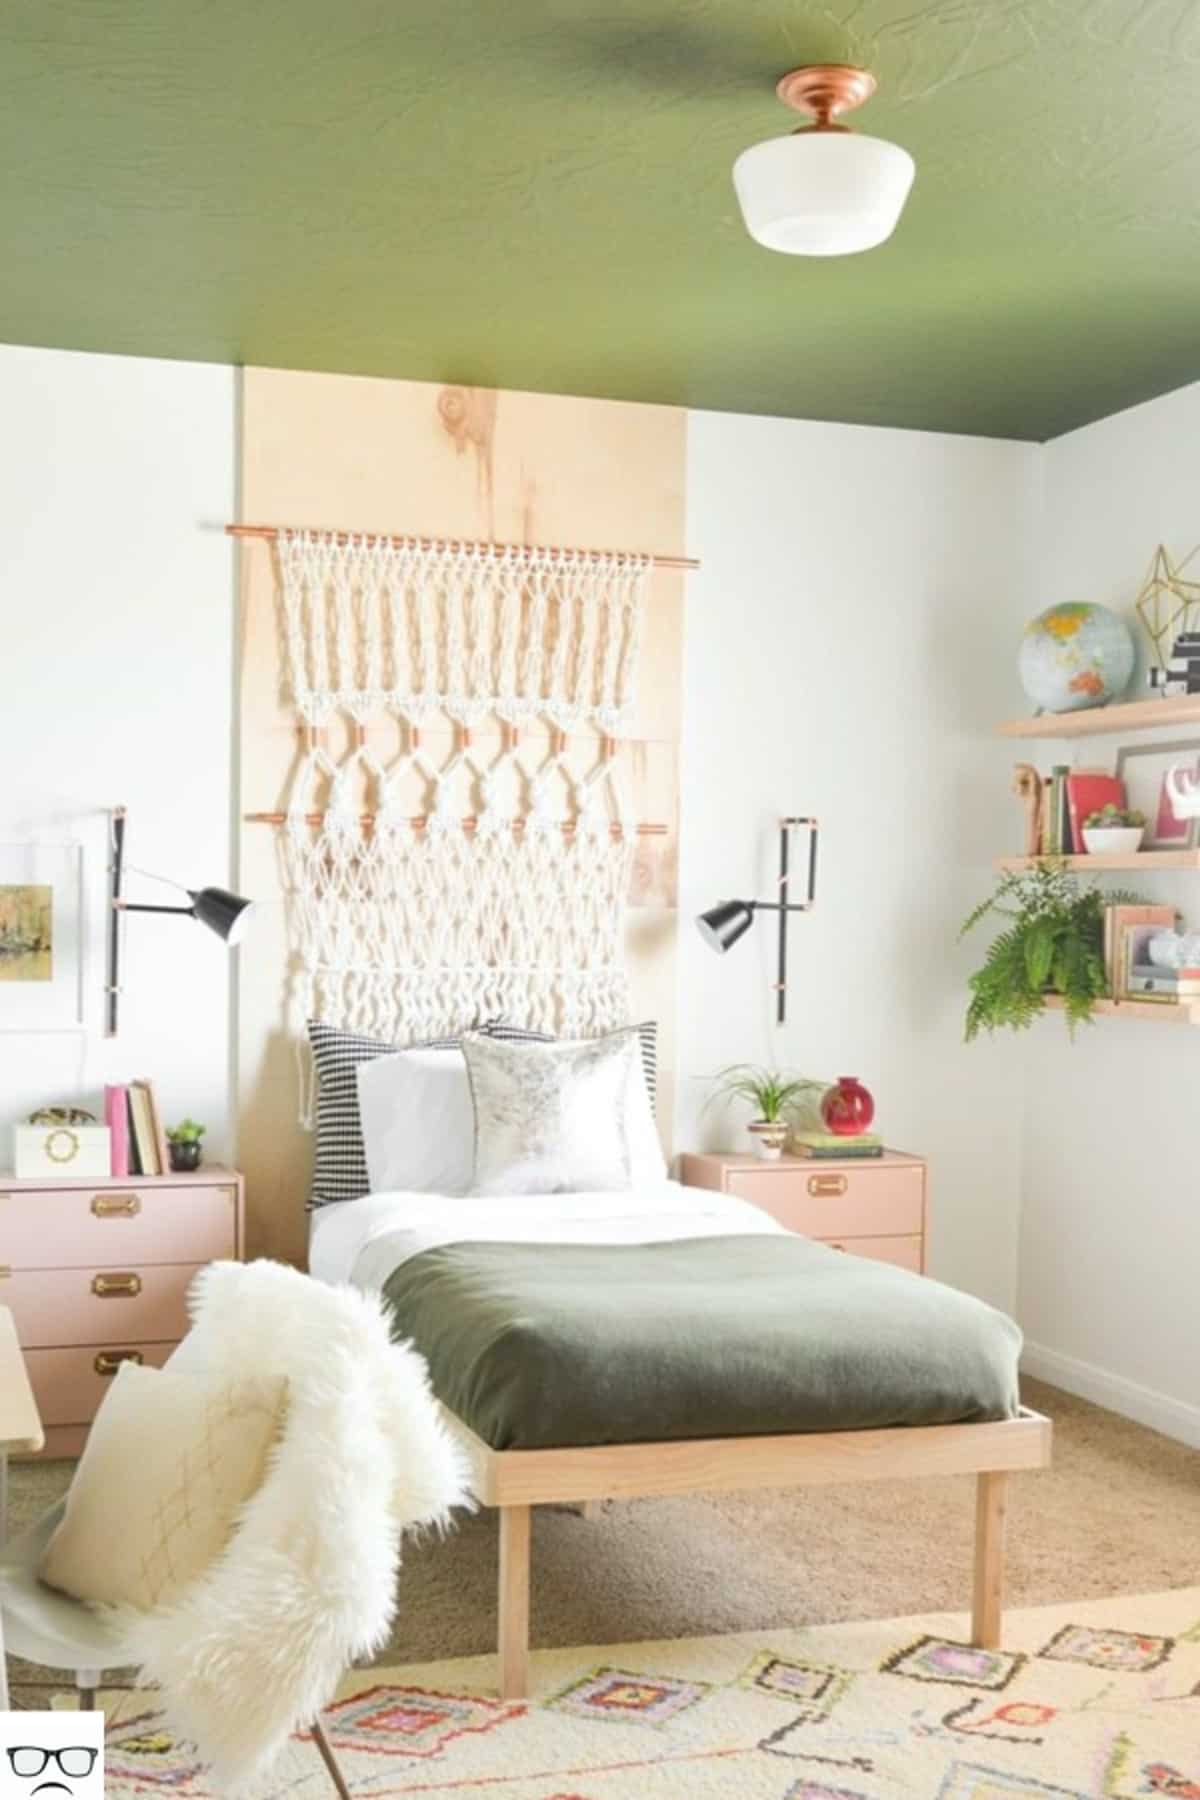 Simple, Square Platform Bed with Legs